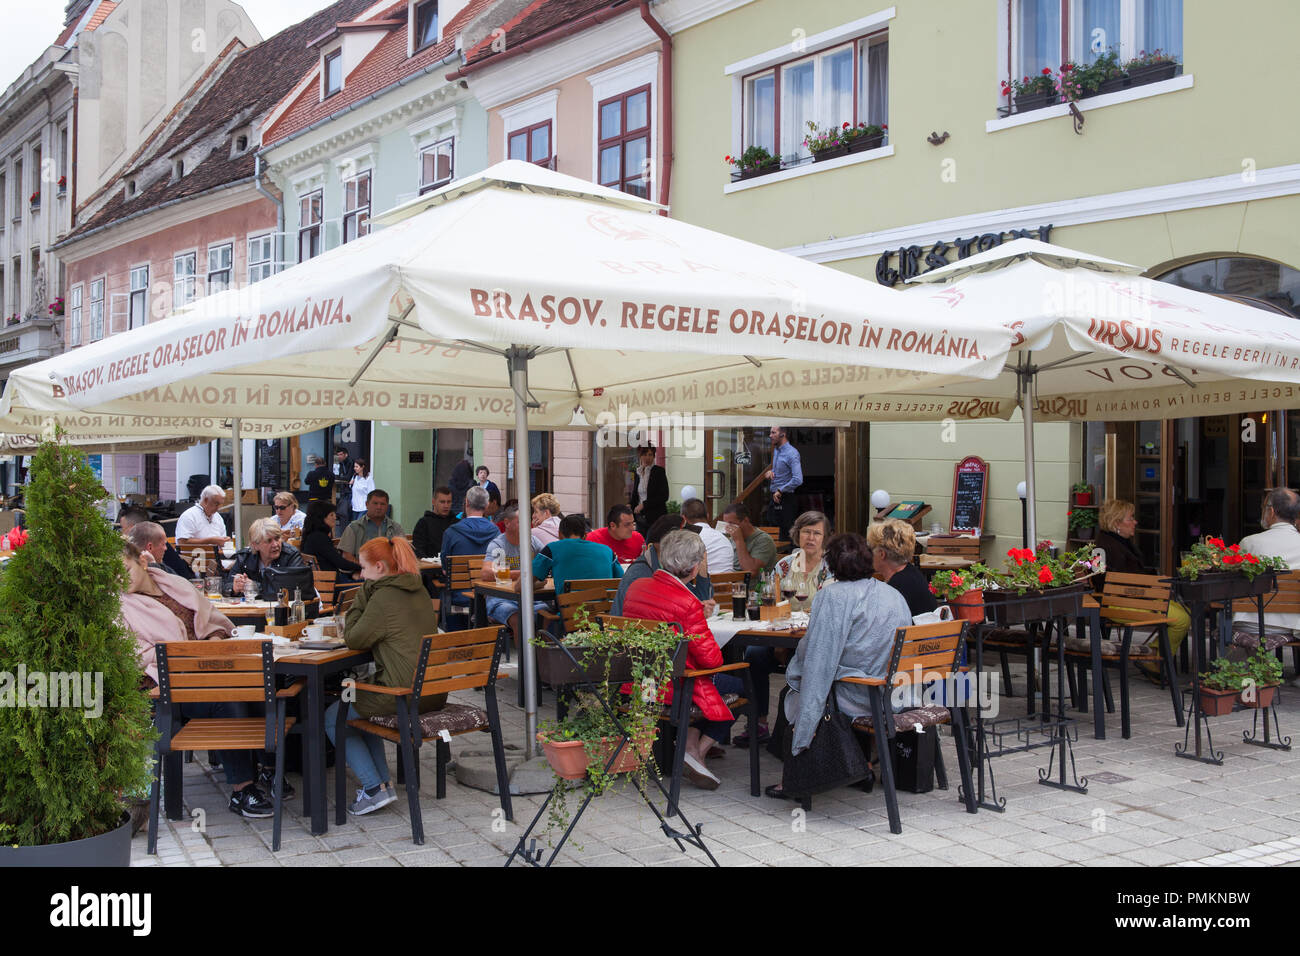 Café in the main square of the old town in Brasov, Romania Stock Photo